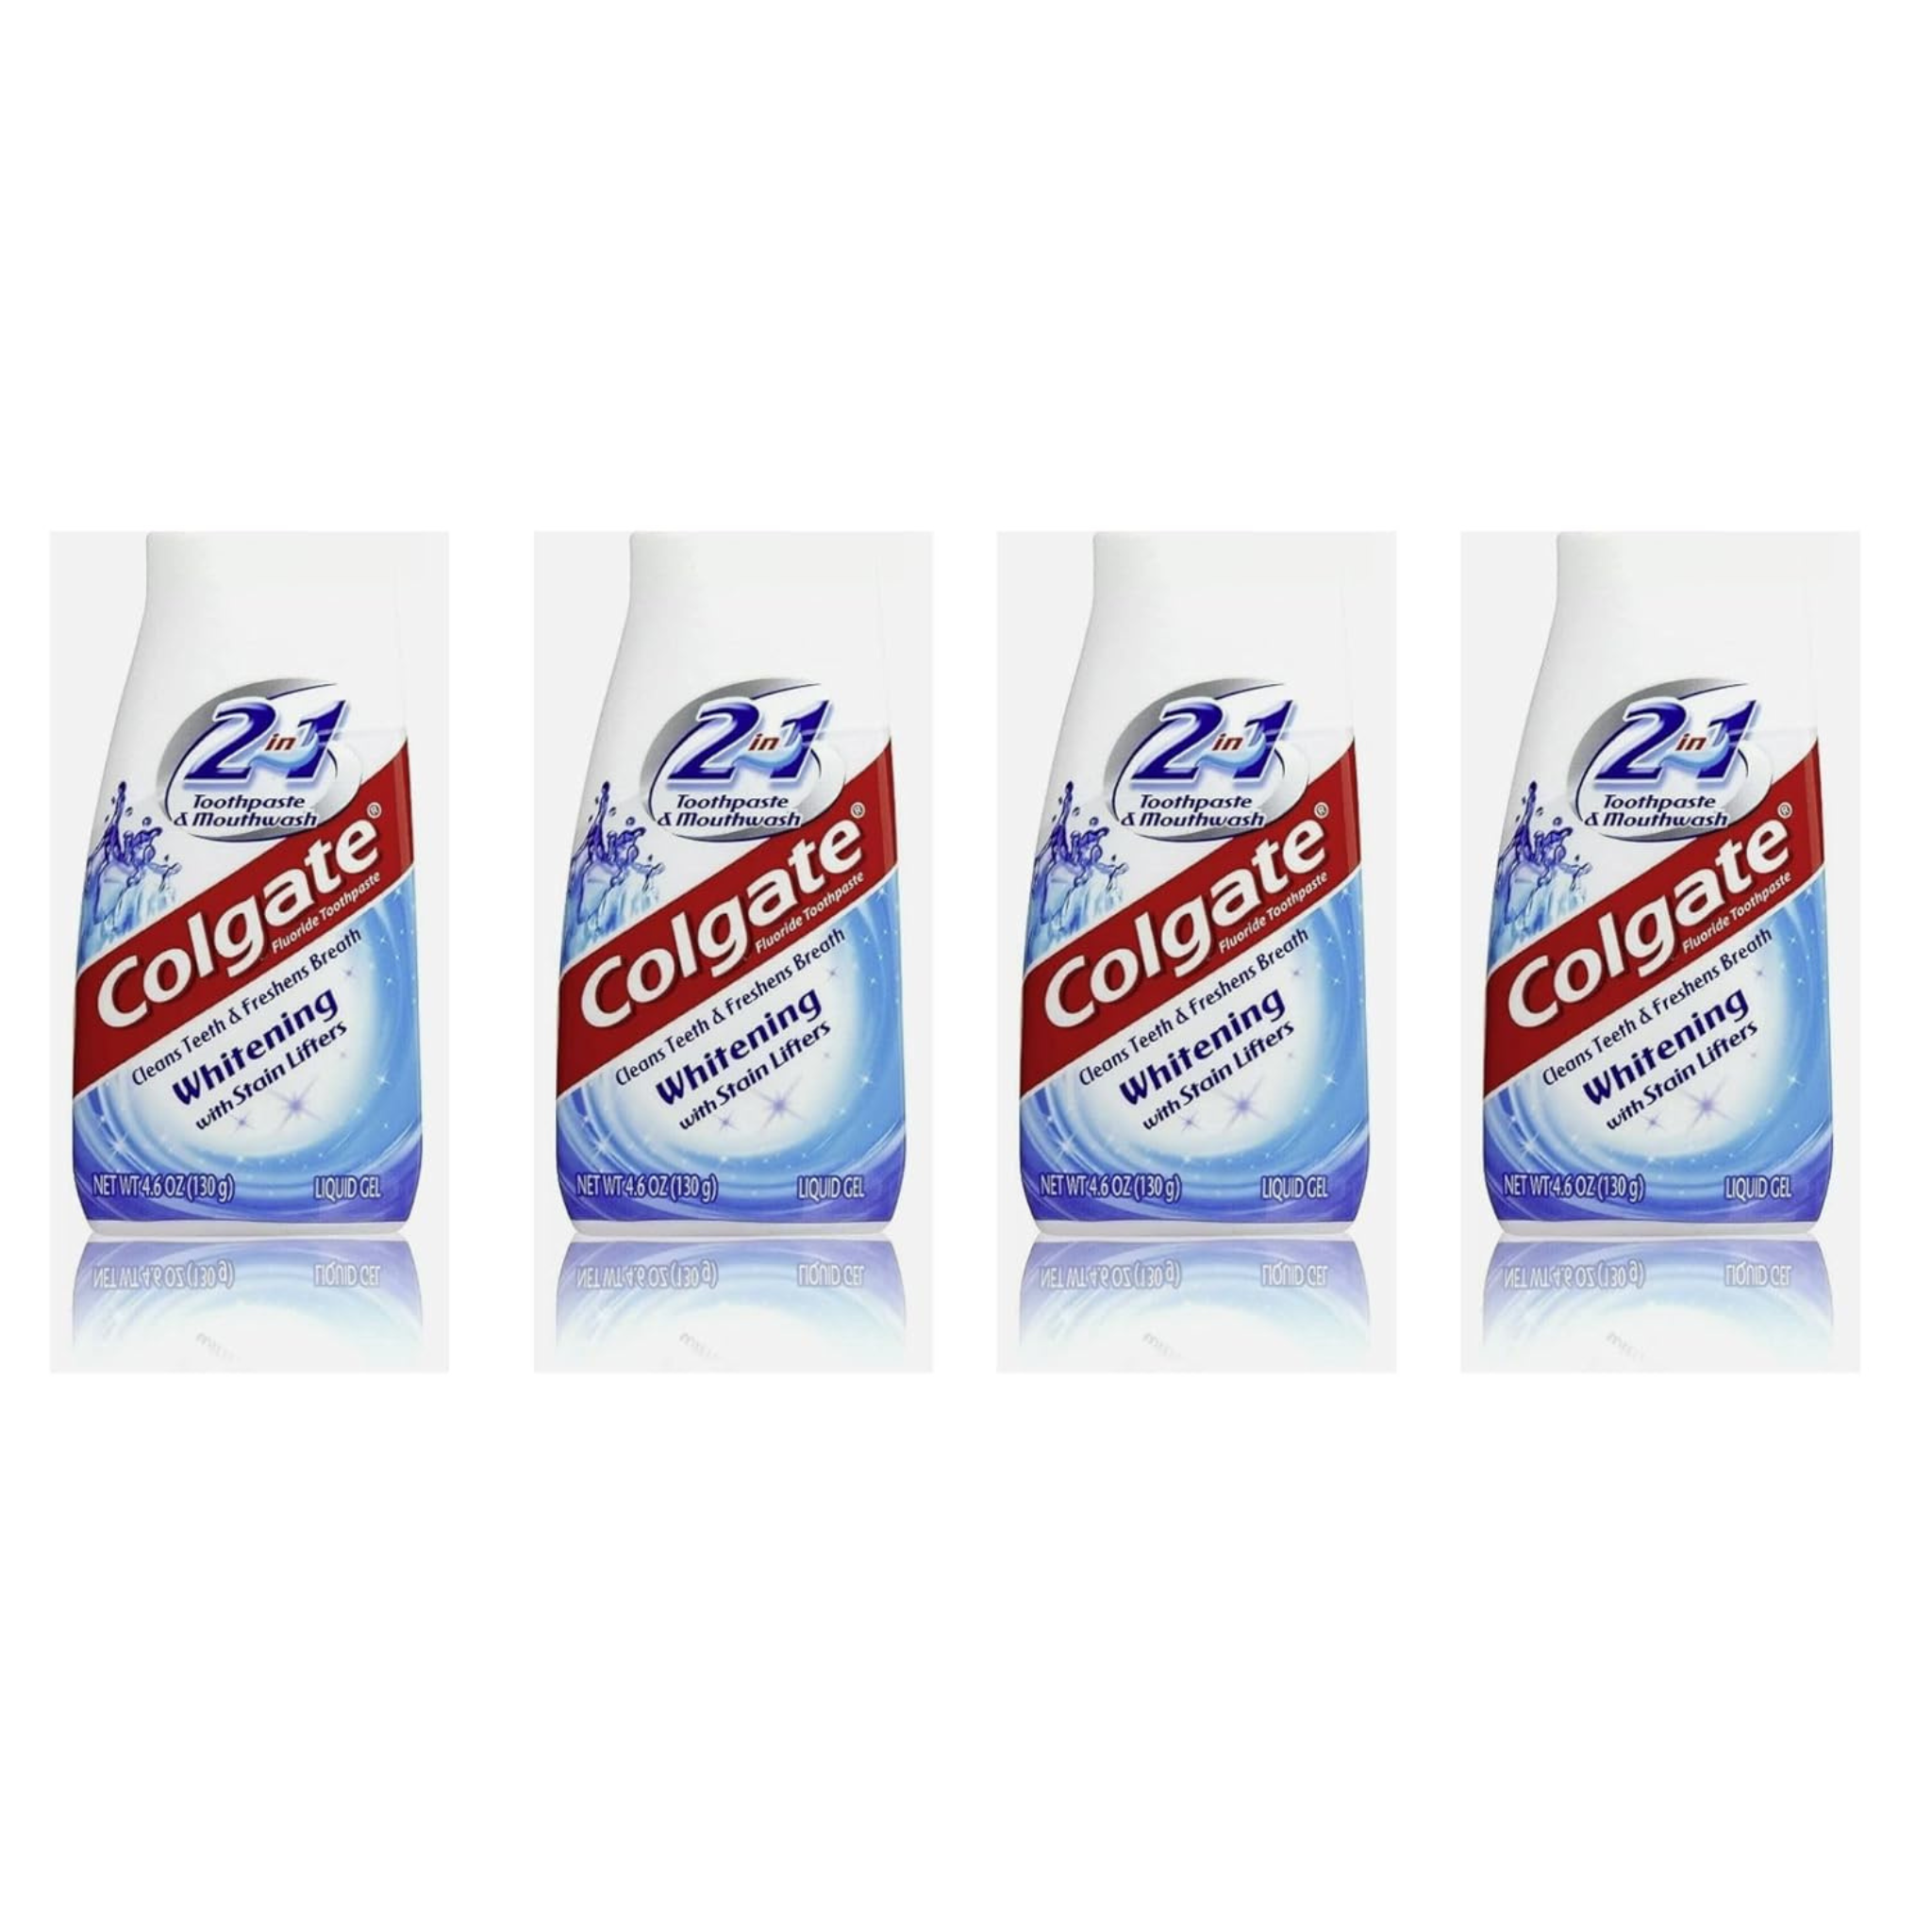 Colgate 2-in-1 Whitening With Stain Lifters Toothpaste, 4 Pack